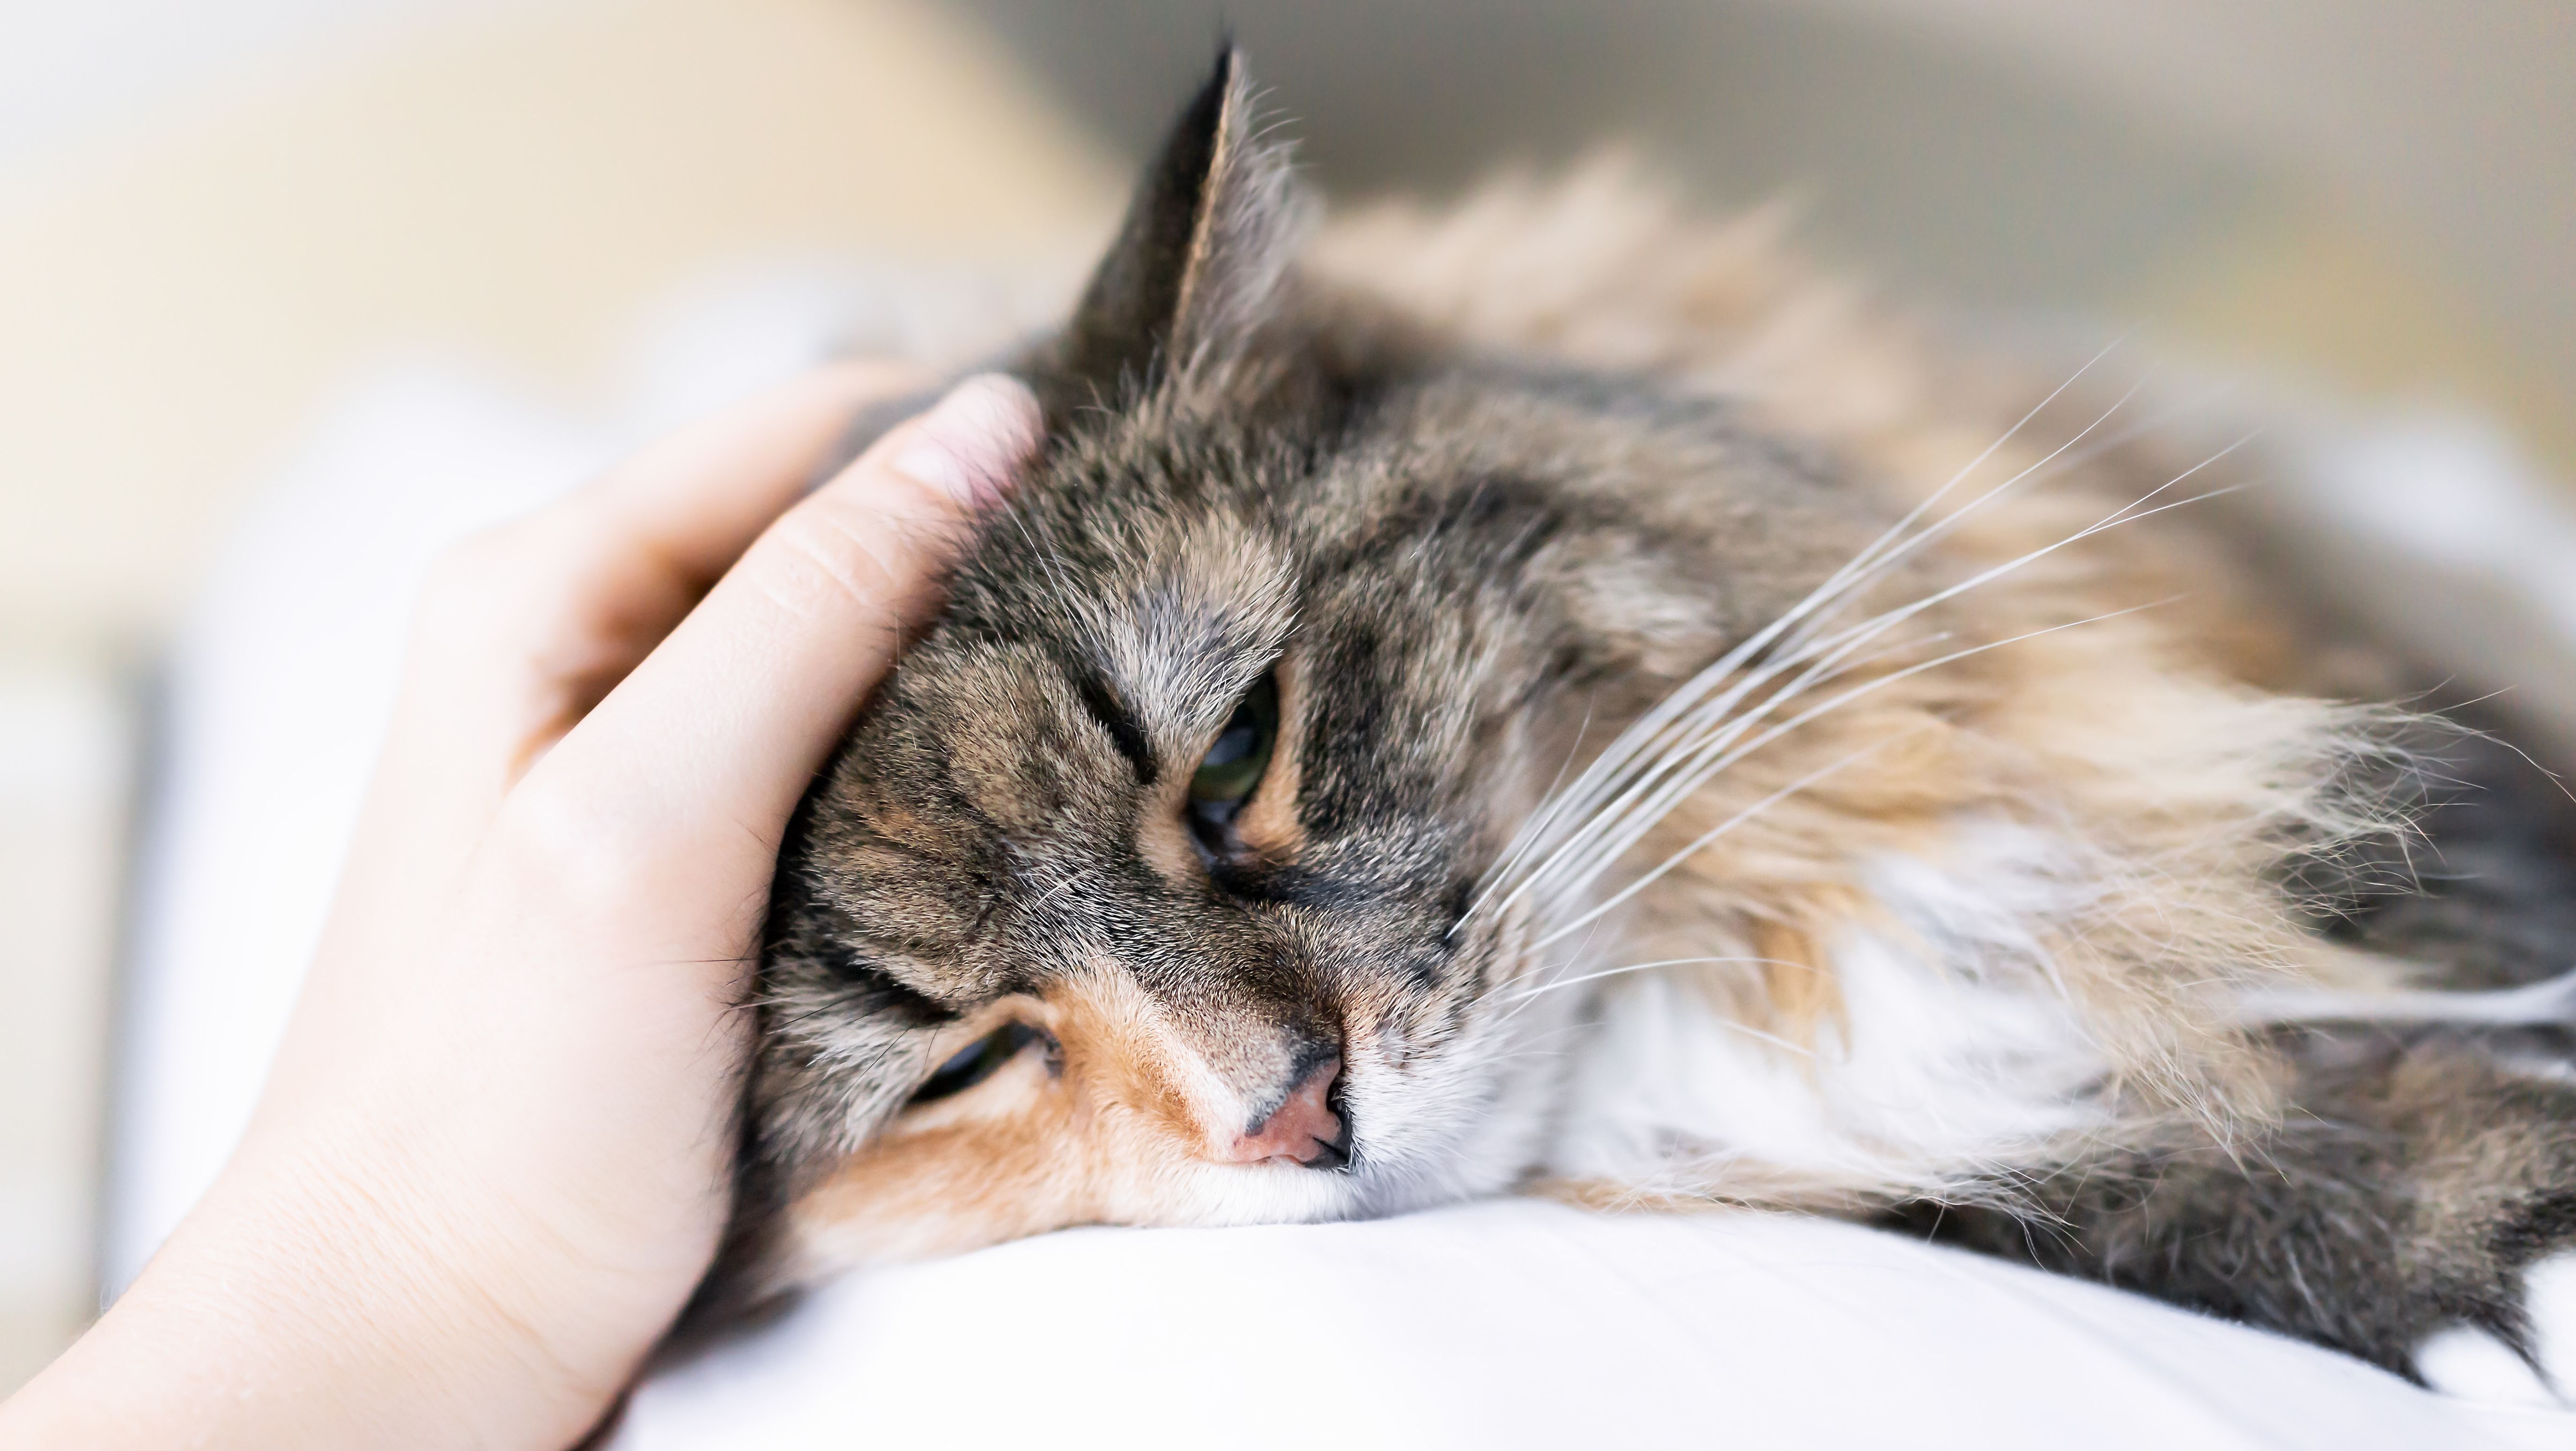 The Best Way to Pet a Cat, According to an Expert | Mental Floss